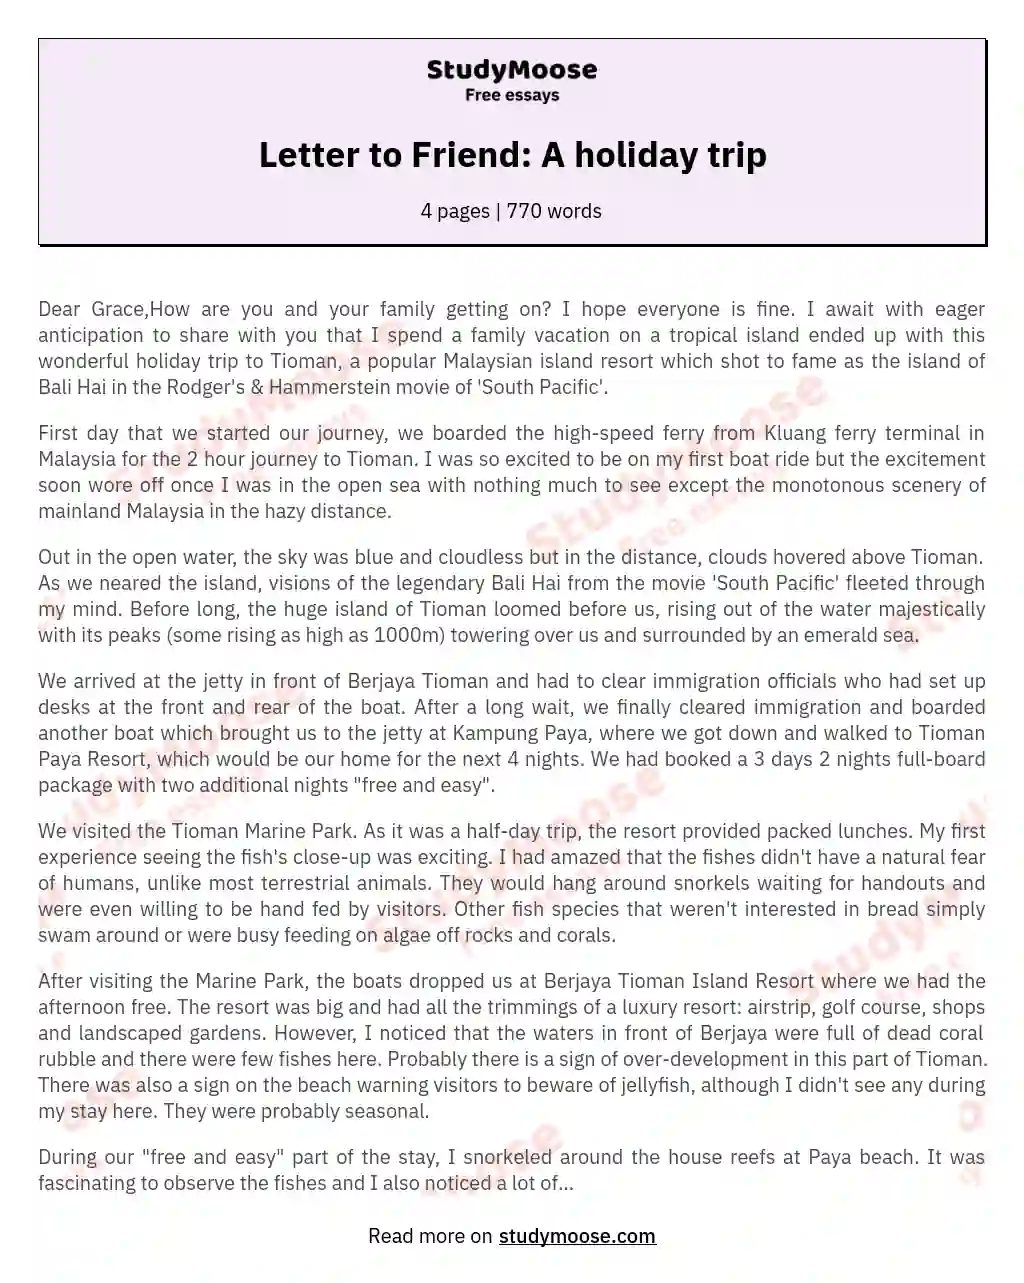 Letter to Friend: A holiday trip essay